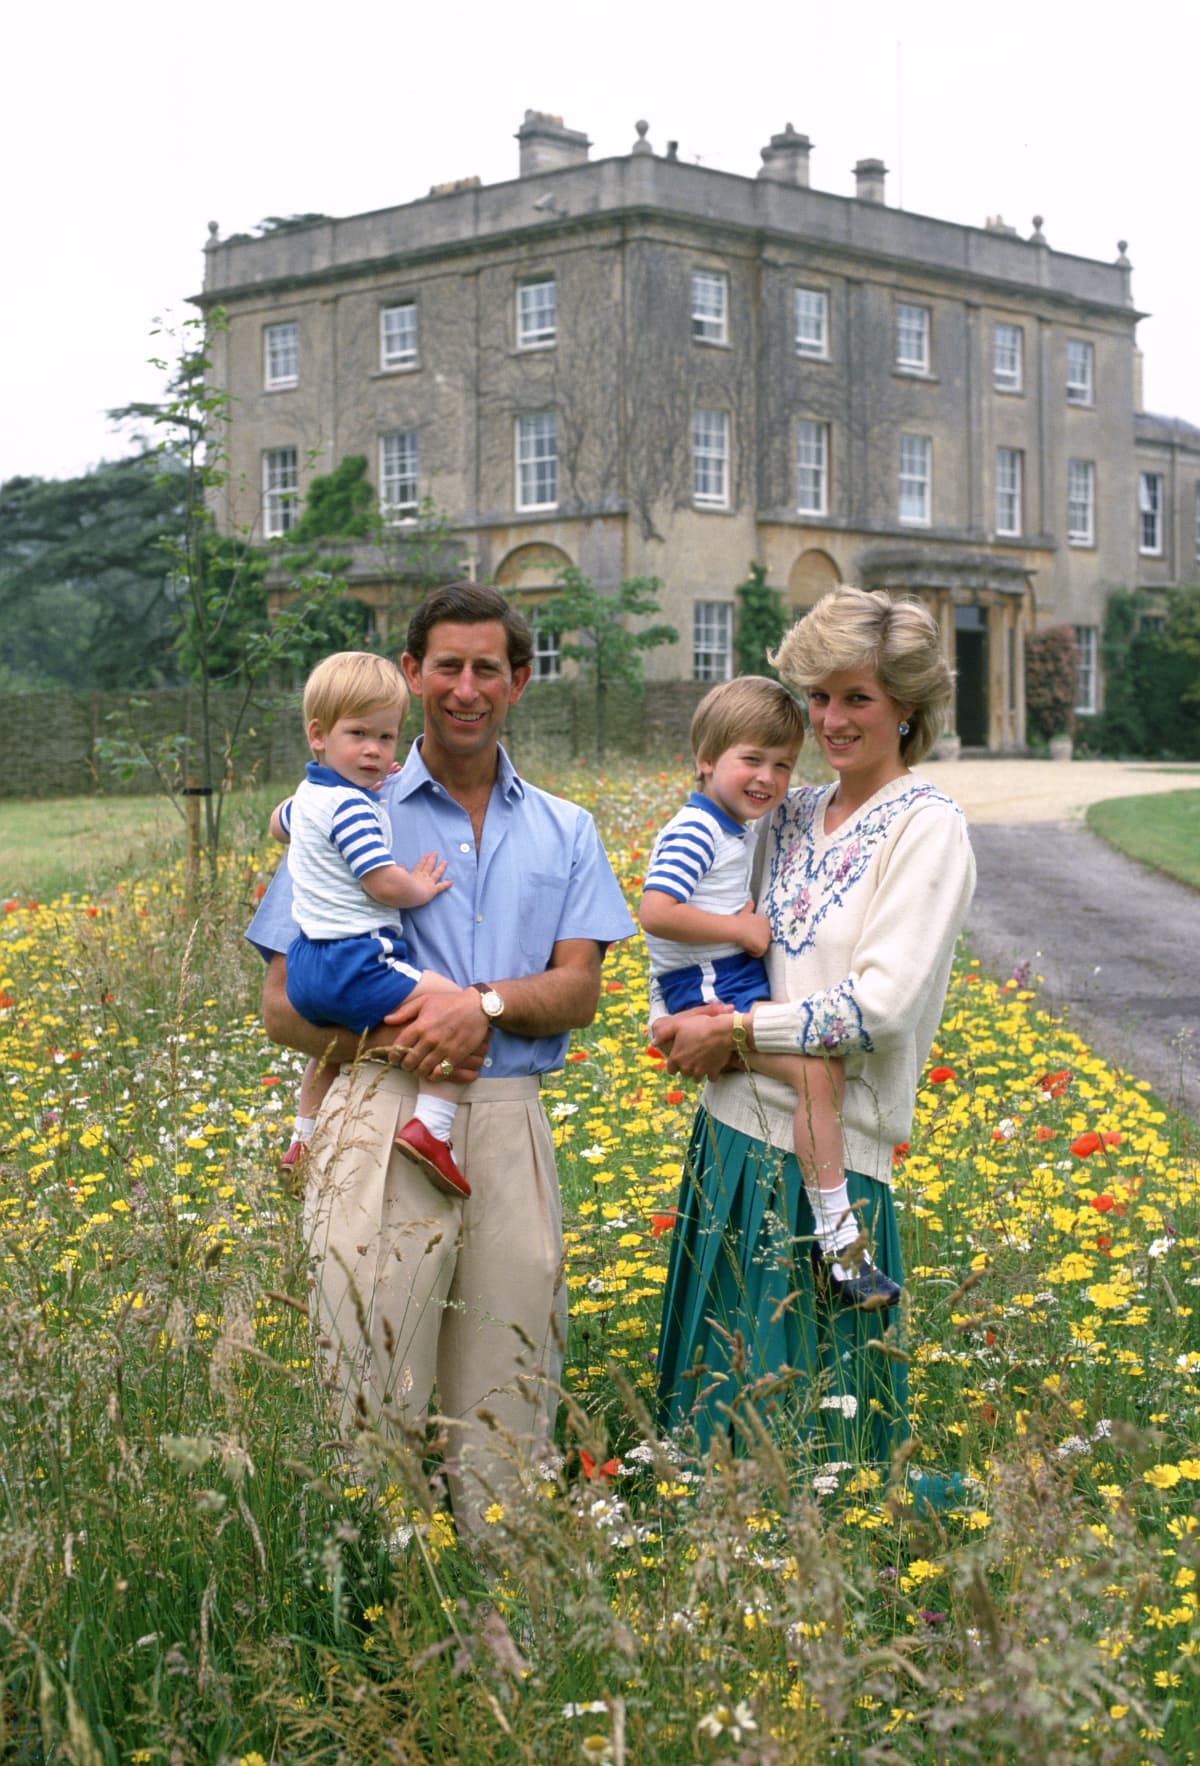 Prince Charles holding Prince Harry and Princess Diana holding Prince William outside of Highgrove House